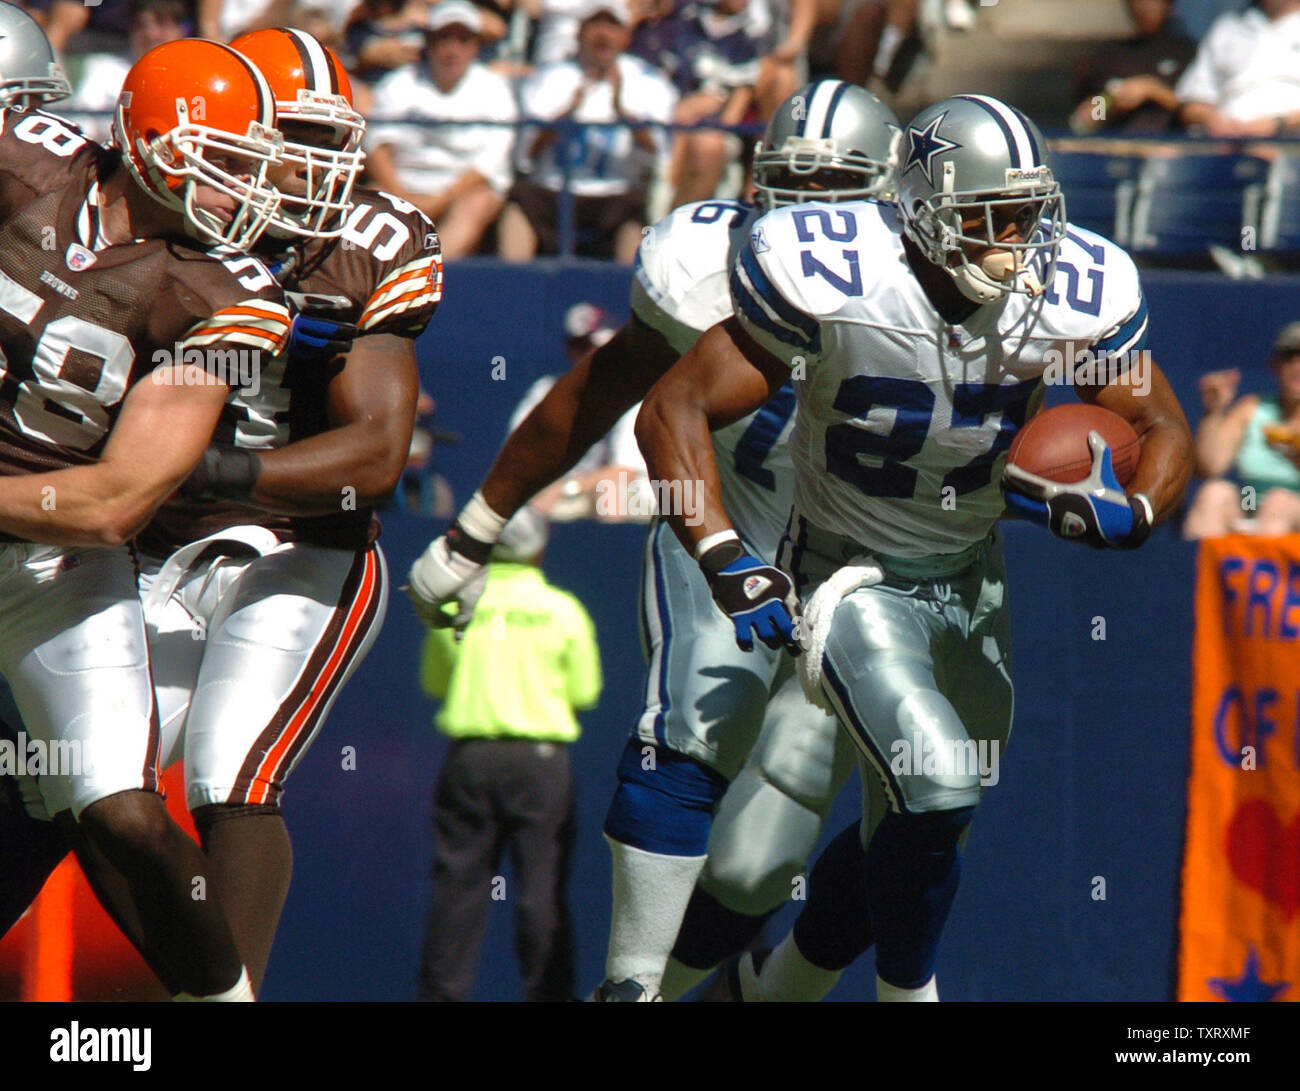 Dallas Cowboys runningback Eddie George breaks free during the Browns-Cowboys game Sept. 9, 2004 at Texas Stadium